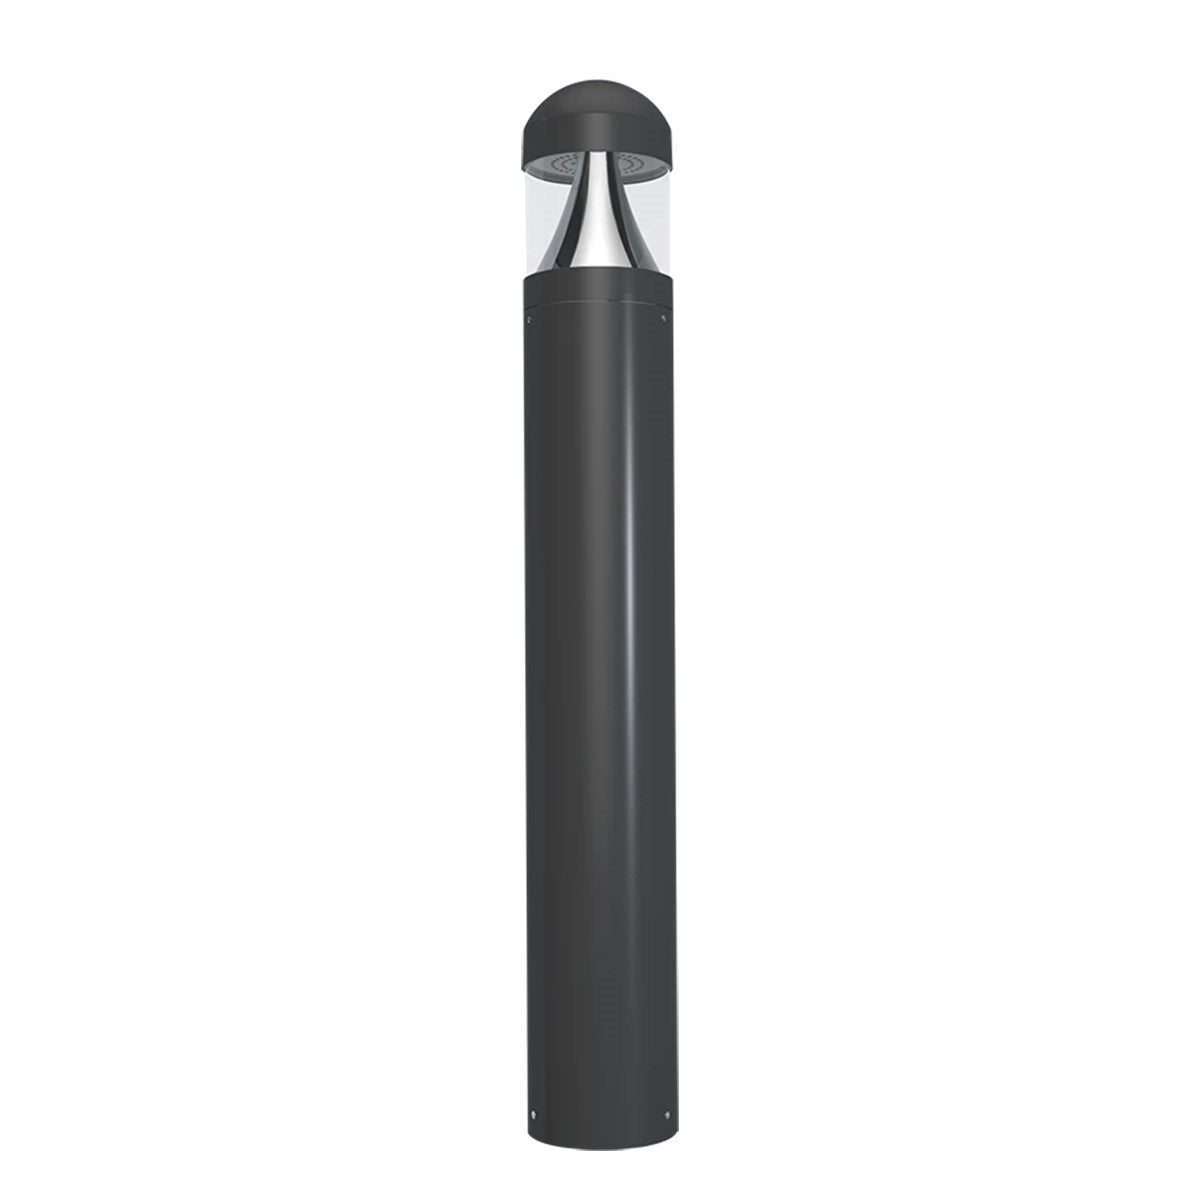 42 in. LED Bollard Lights With Photocell, 24 Watt, 30K/40K/50K Selectable CCT, 120-277V Input, Dome Top, Round Shape